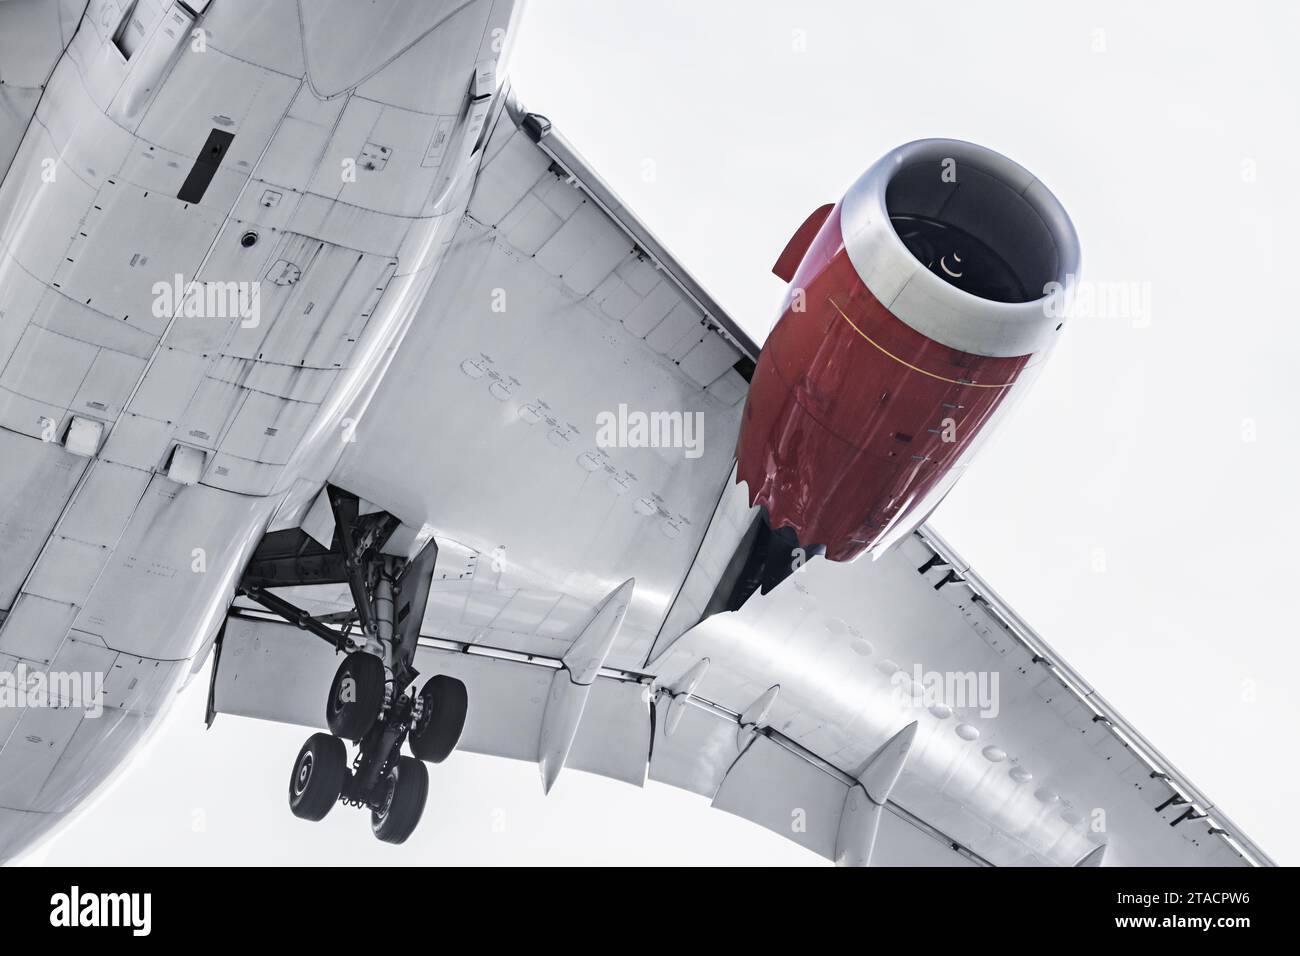 Observing the fuselage of an airplane Stock Photo